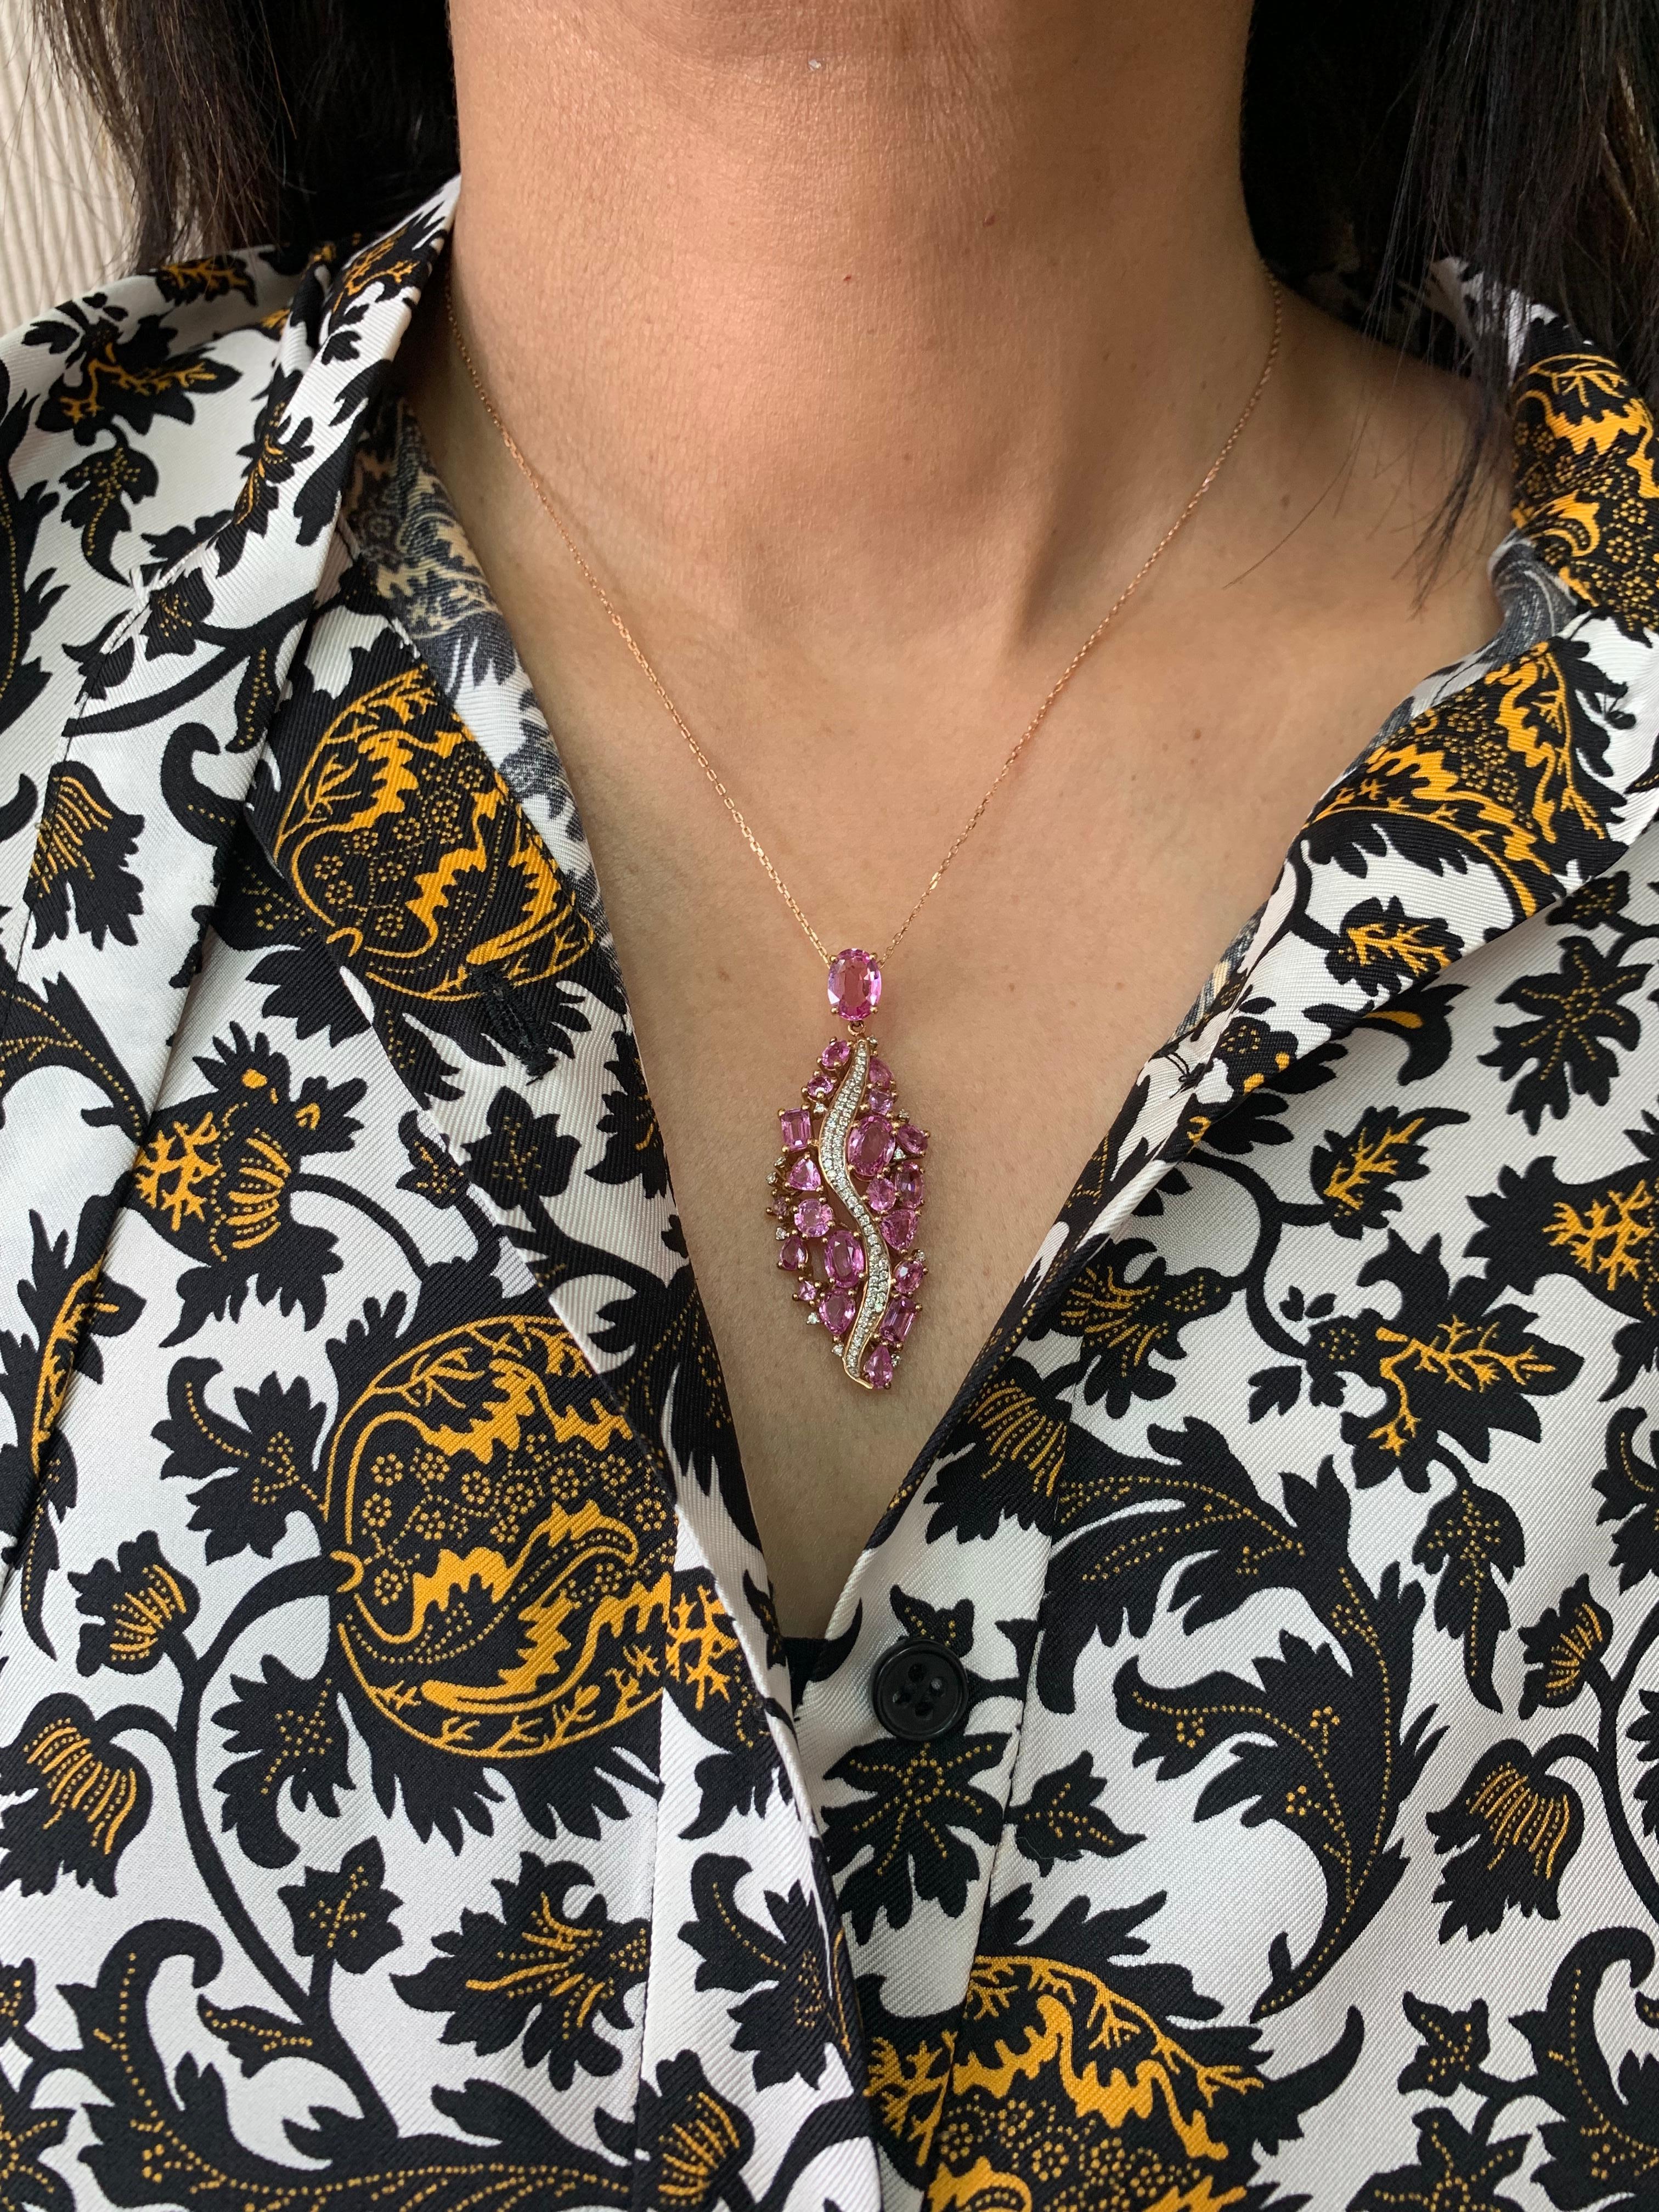 Sunita Nahata presents an exclusive collection of pink sapphire pendants. With a mix of floral designs and cluster setting these pieces are accented with diamonds to present a unique array of pendants.

Designer pink sapphire pendant necklace in 18K